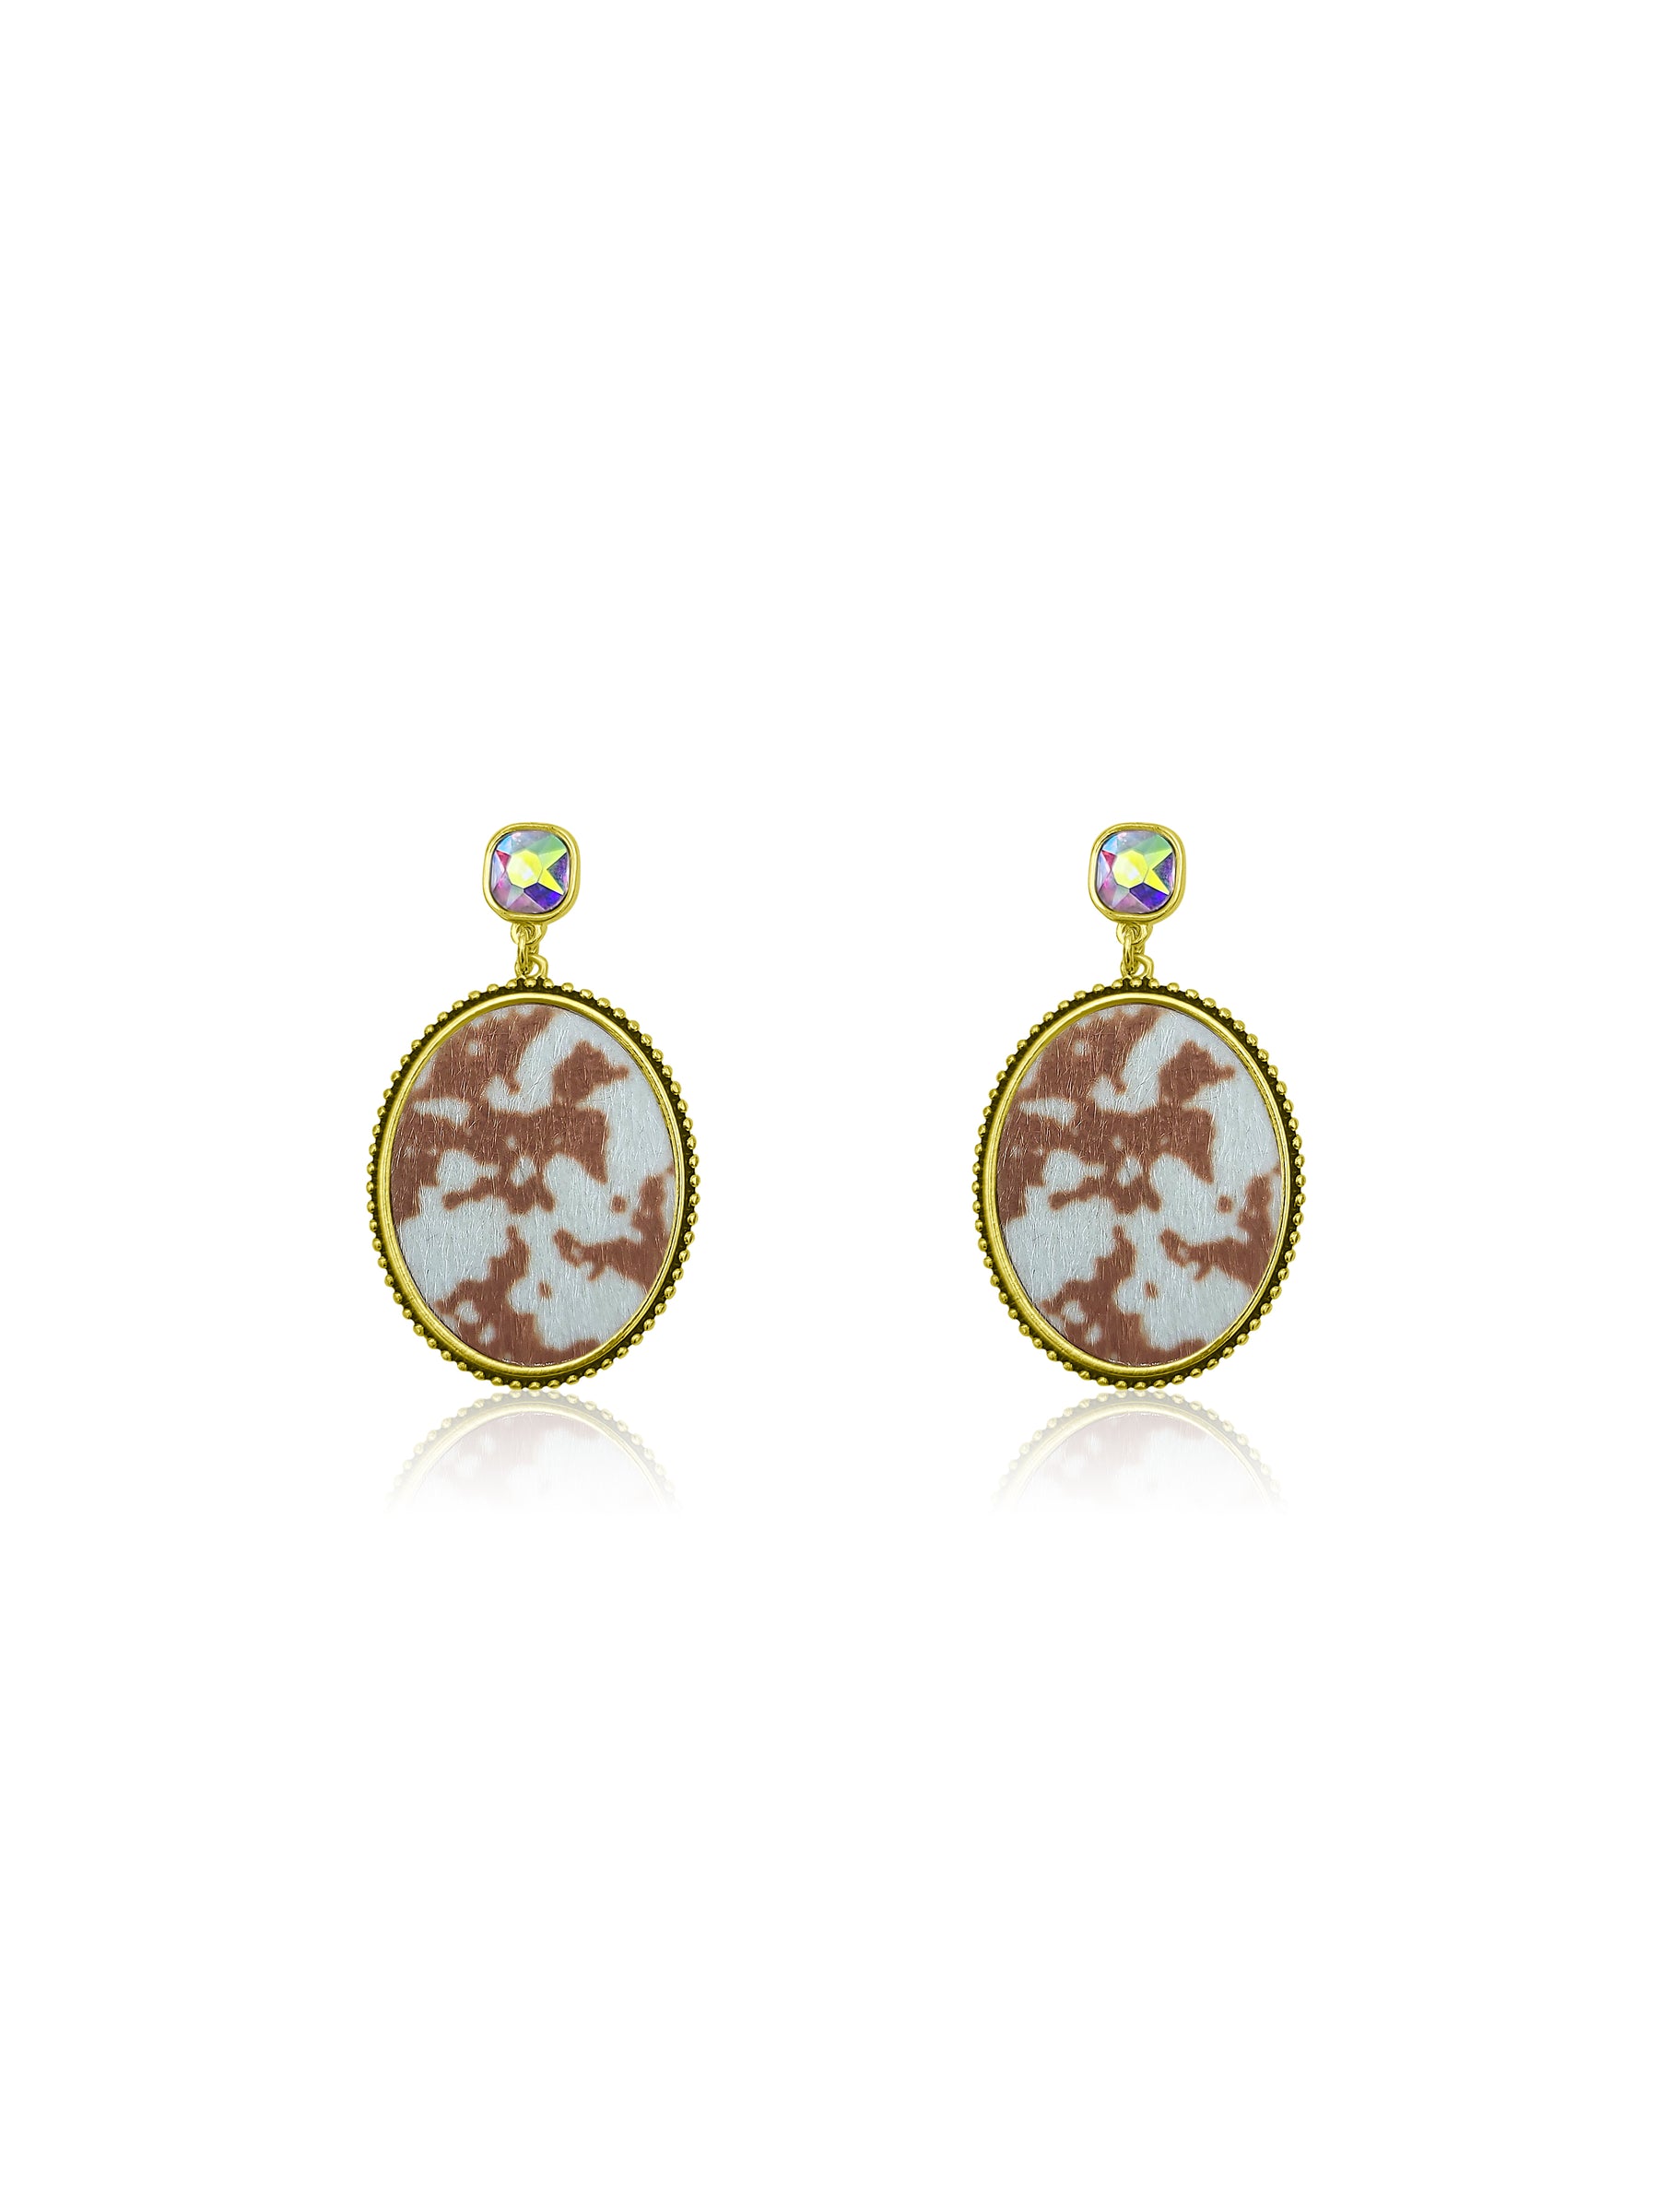 Cow Print Dangle Earrings with Stones